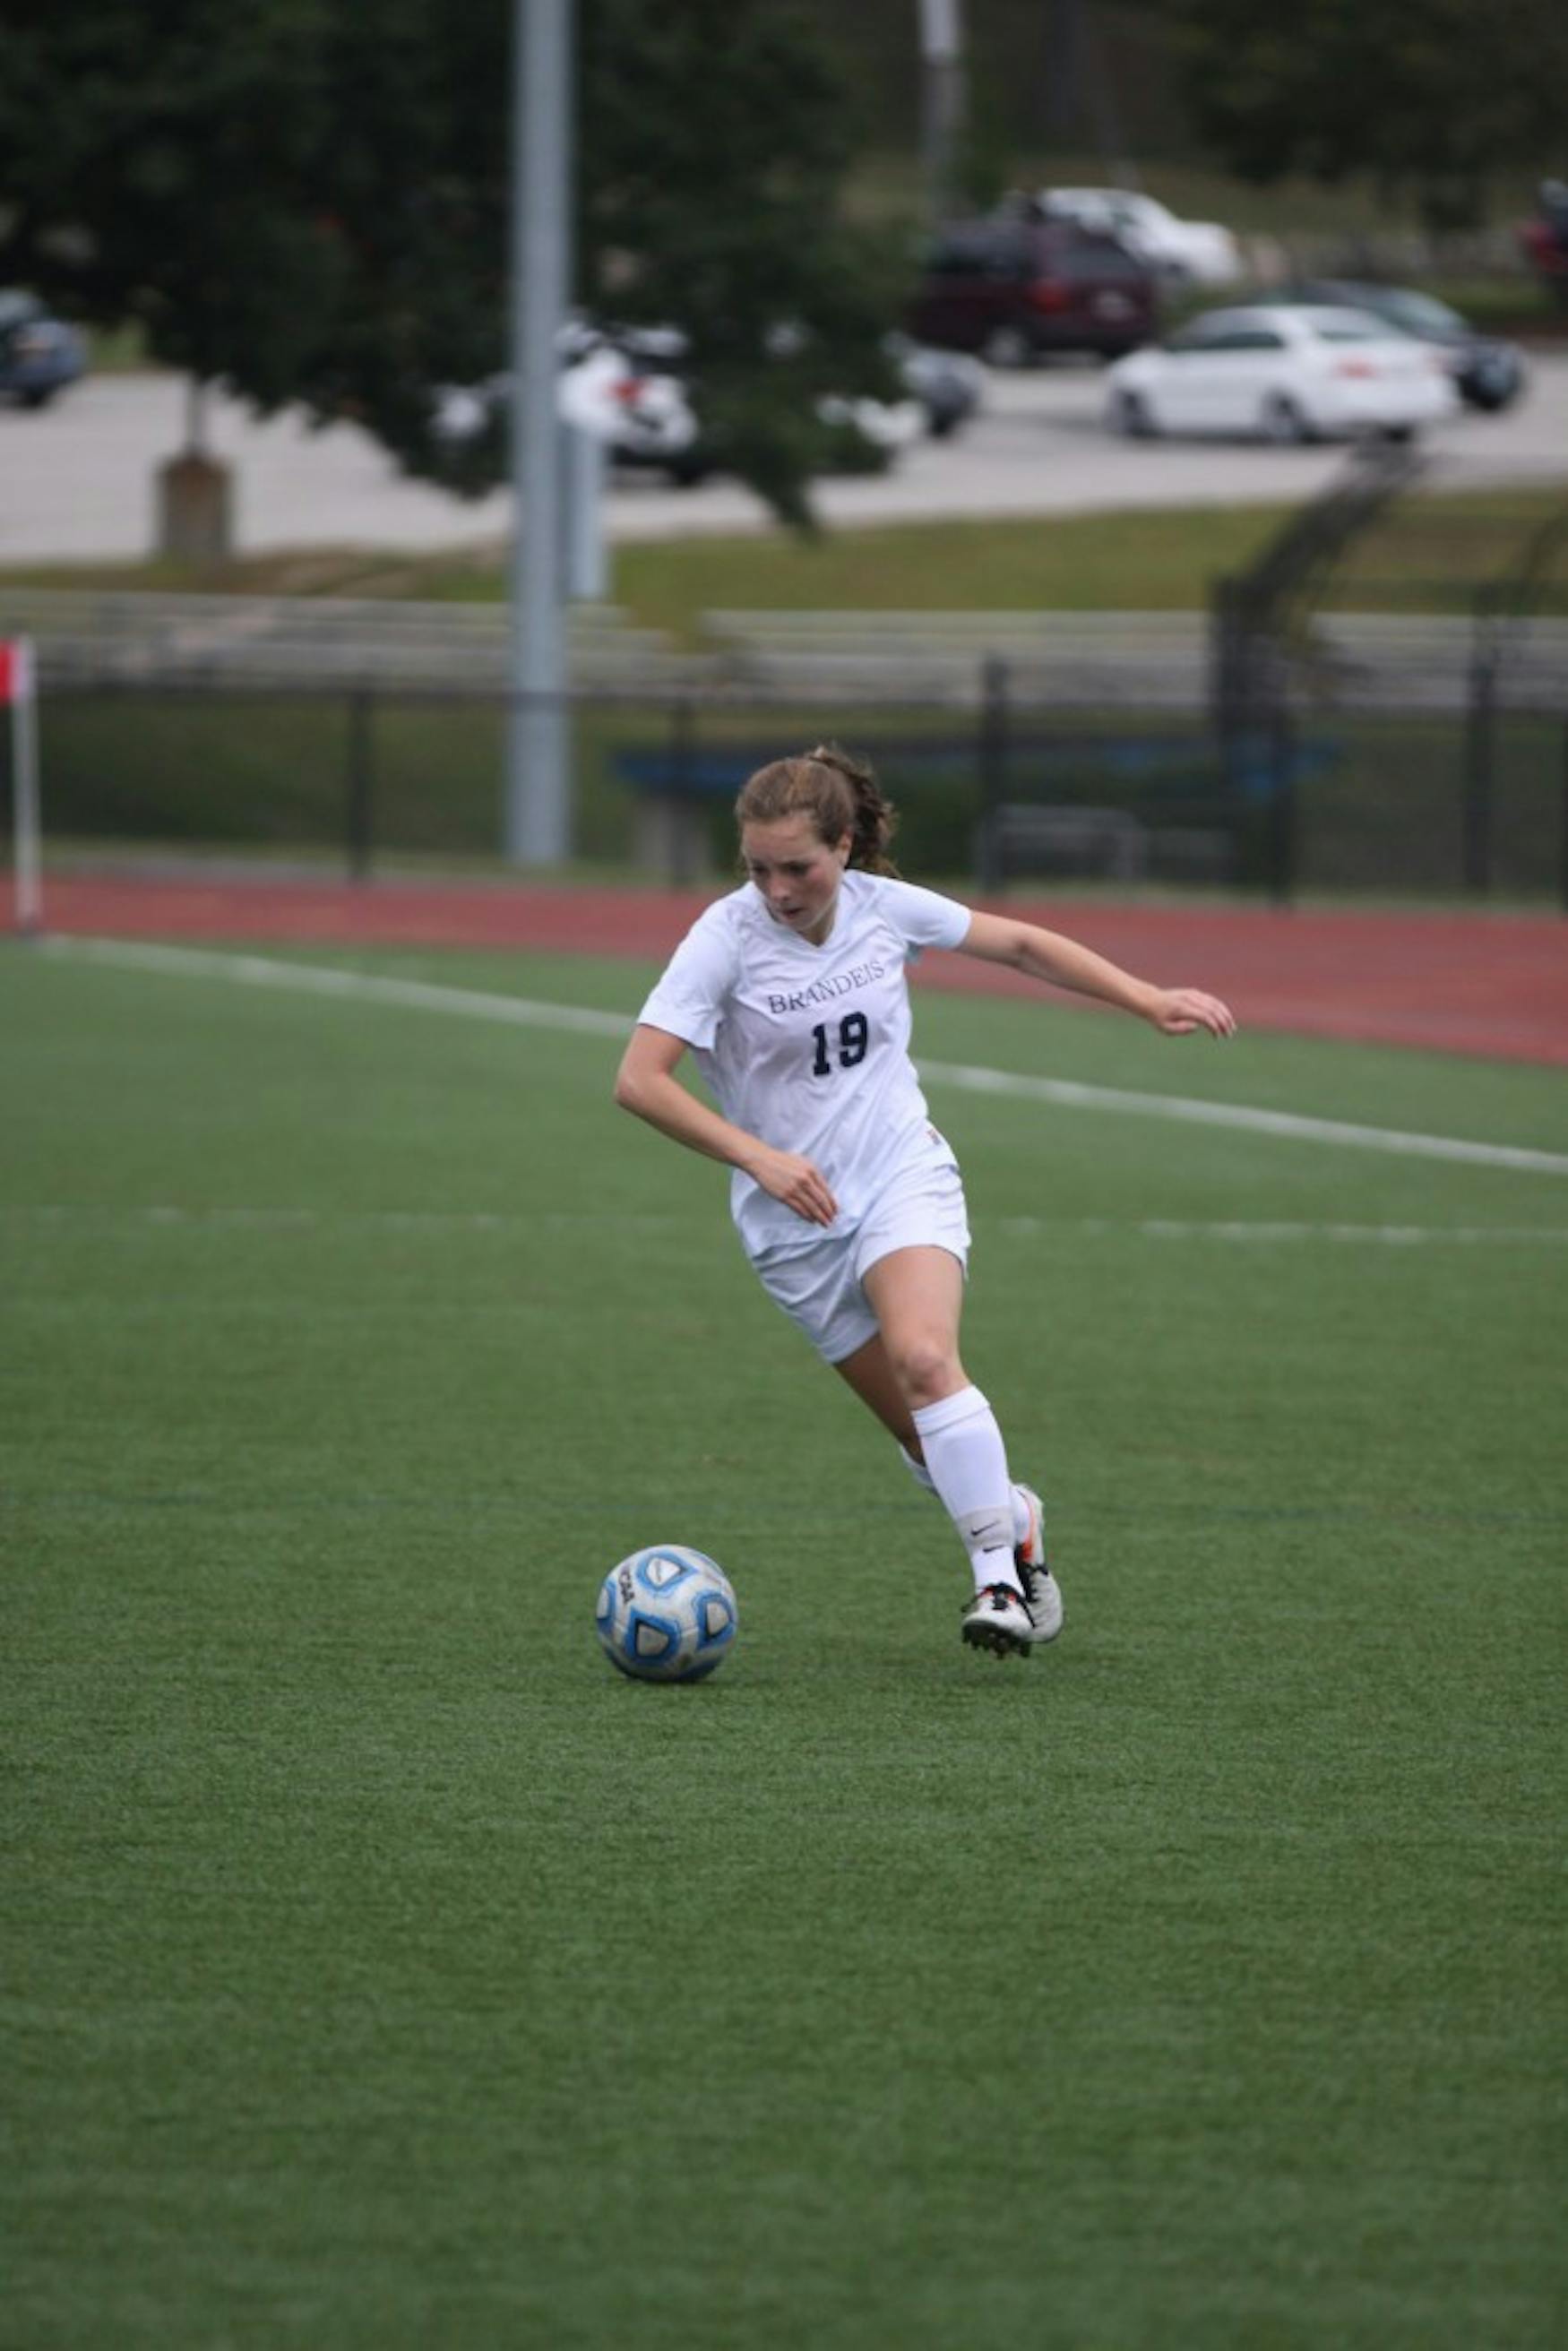 ON THE BALL: Forward Samantha Schwartz ’18 dribbles the ball in the attacking third during the Judges’ home win on Saturday.